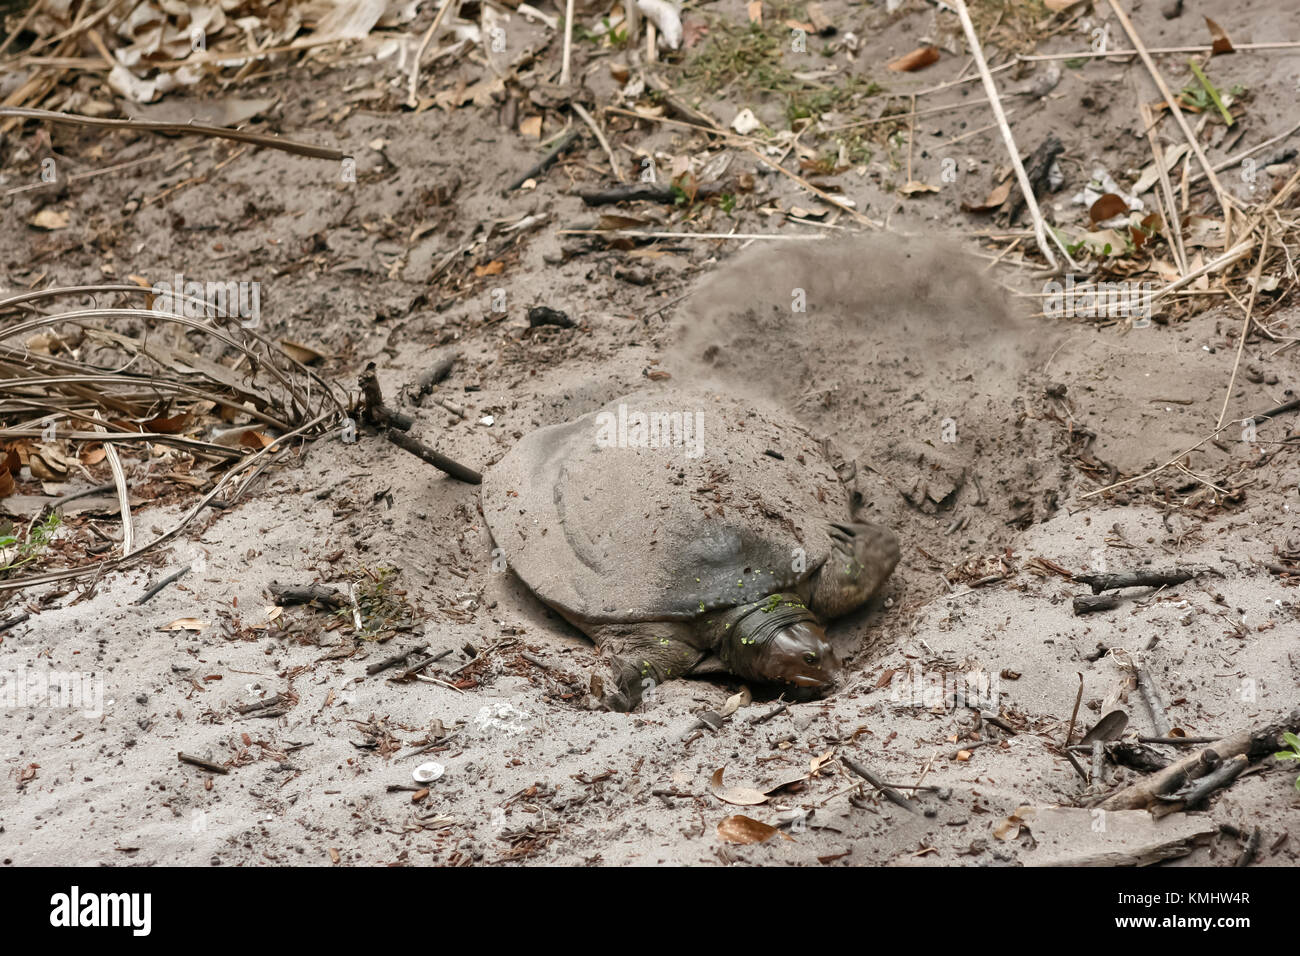 Florida freshwater softshell turtle cooling off by burrowing into the dirt. Stock Photo